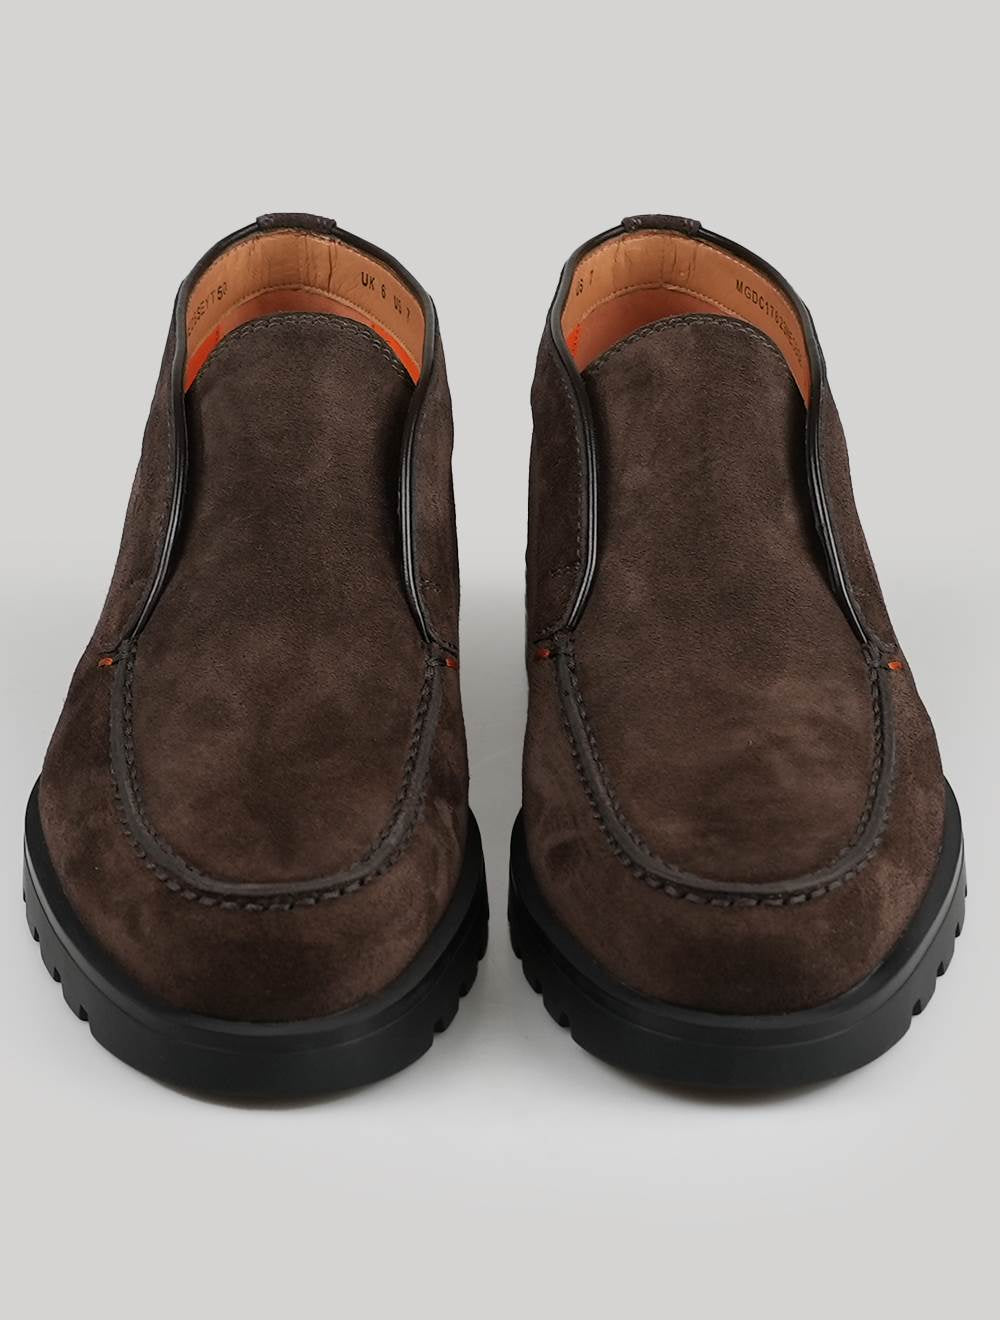 Santoni Castanho Castanho Castanho Camurça Camurça Loafers